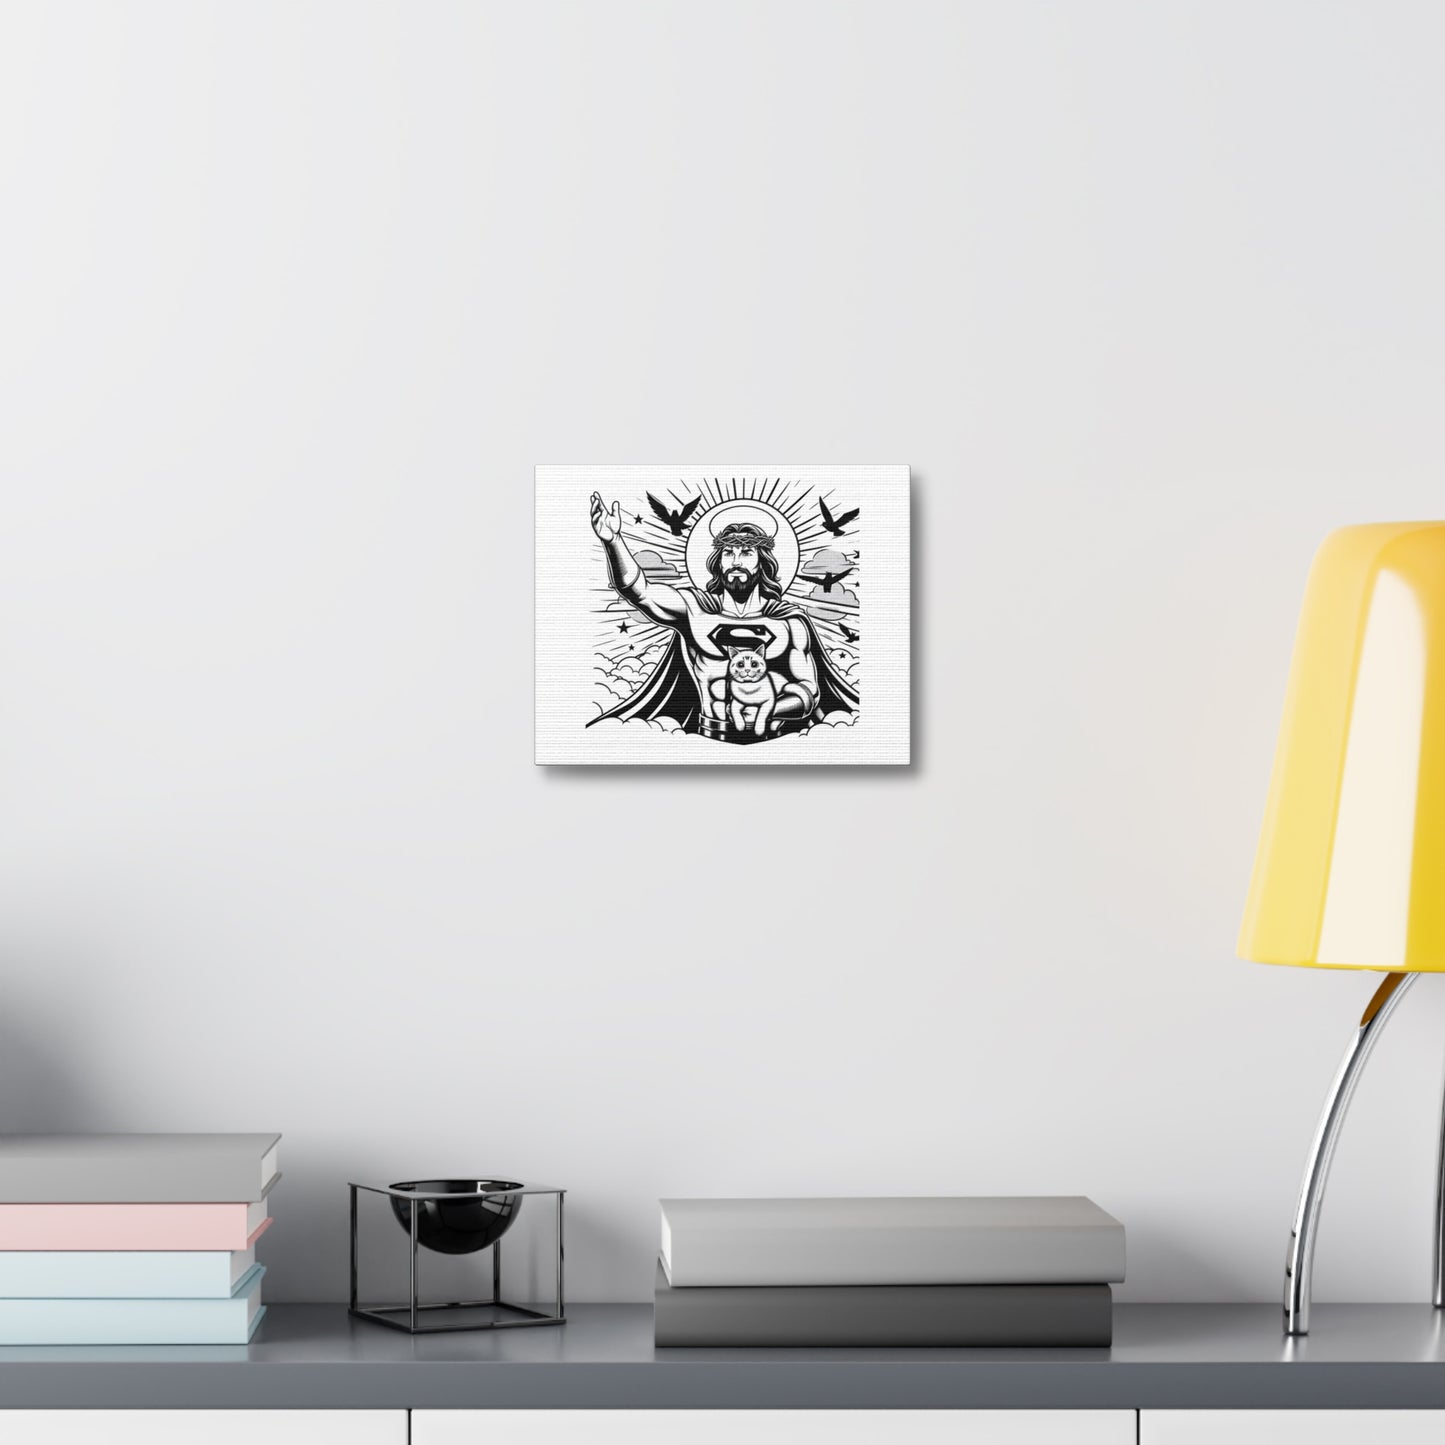 Jesus as a Superhero with a Cat on his Lap, Cartoon Art Print 'Designed by AI' on Canvas